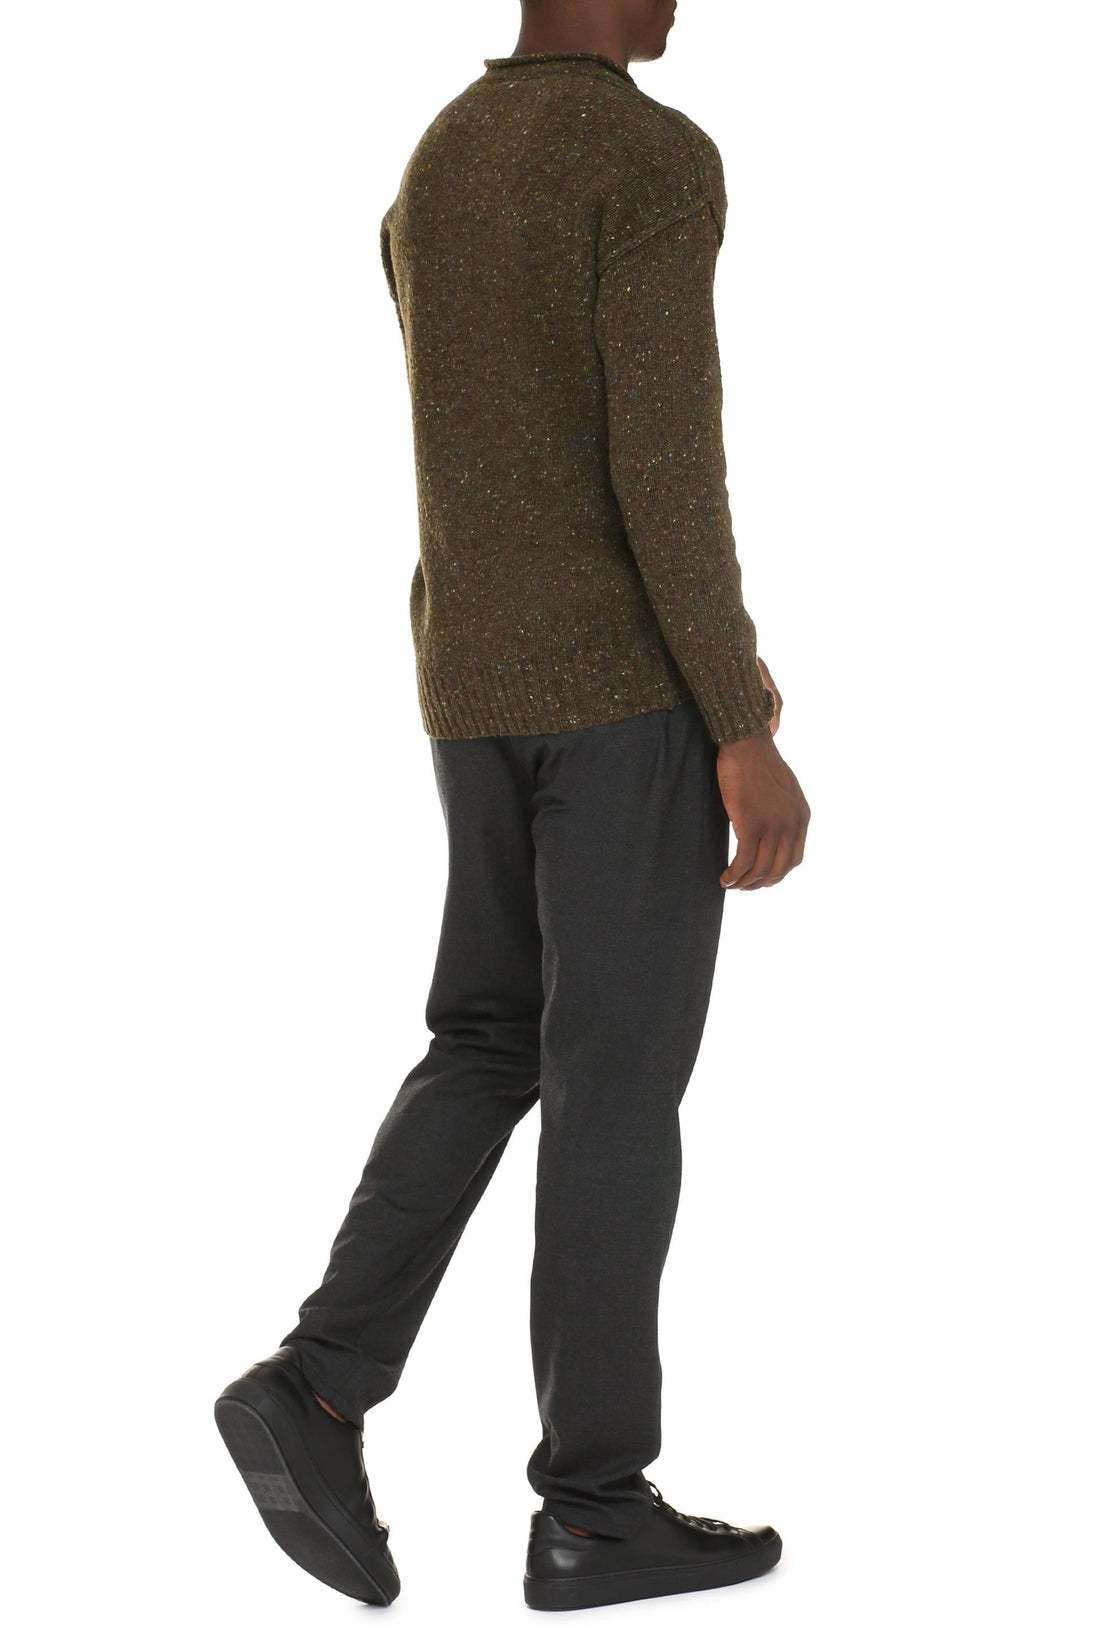 Aspesi-OUTLET-SALE-Knit wool pullover-ARCHIVIST